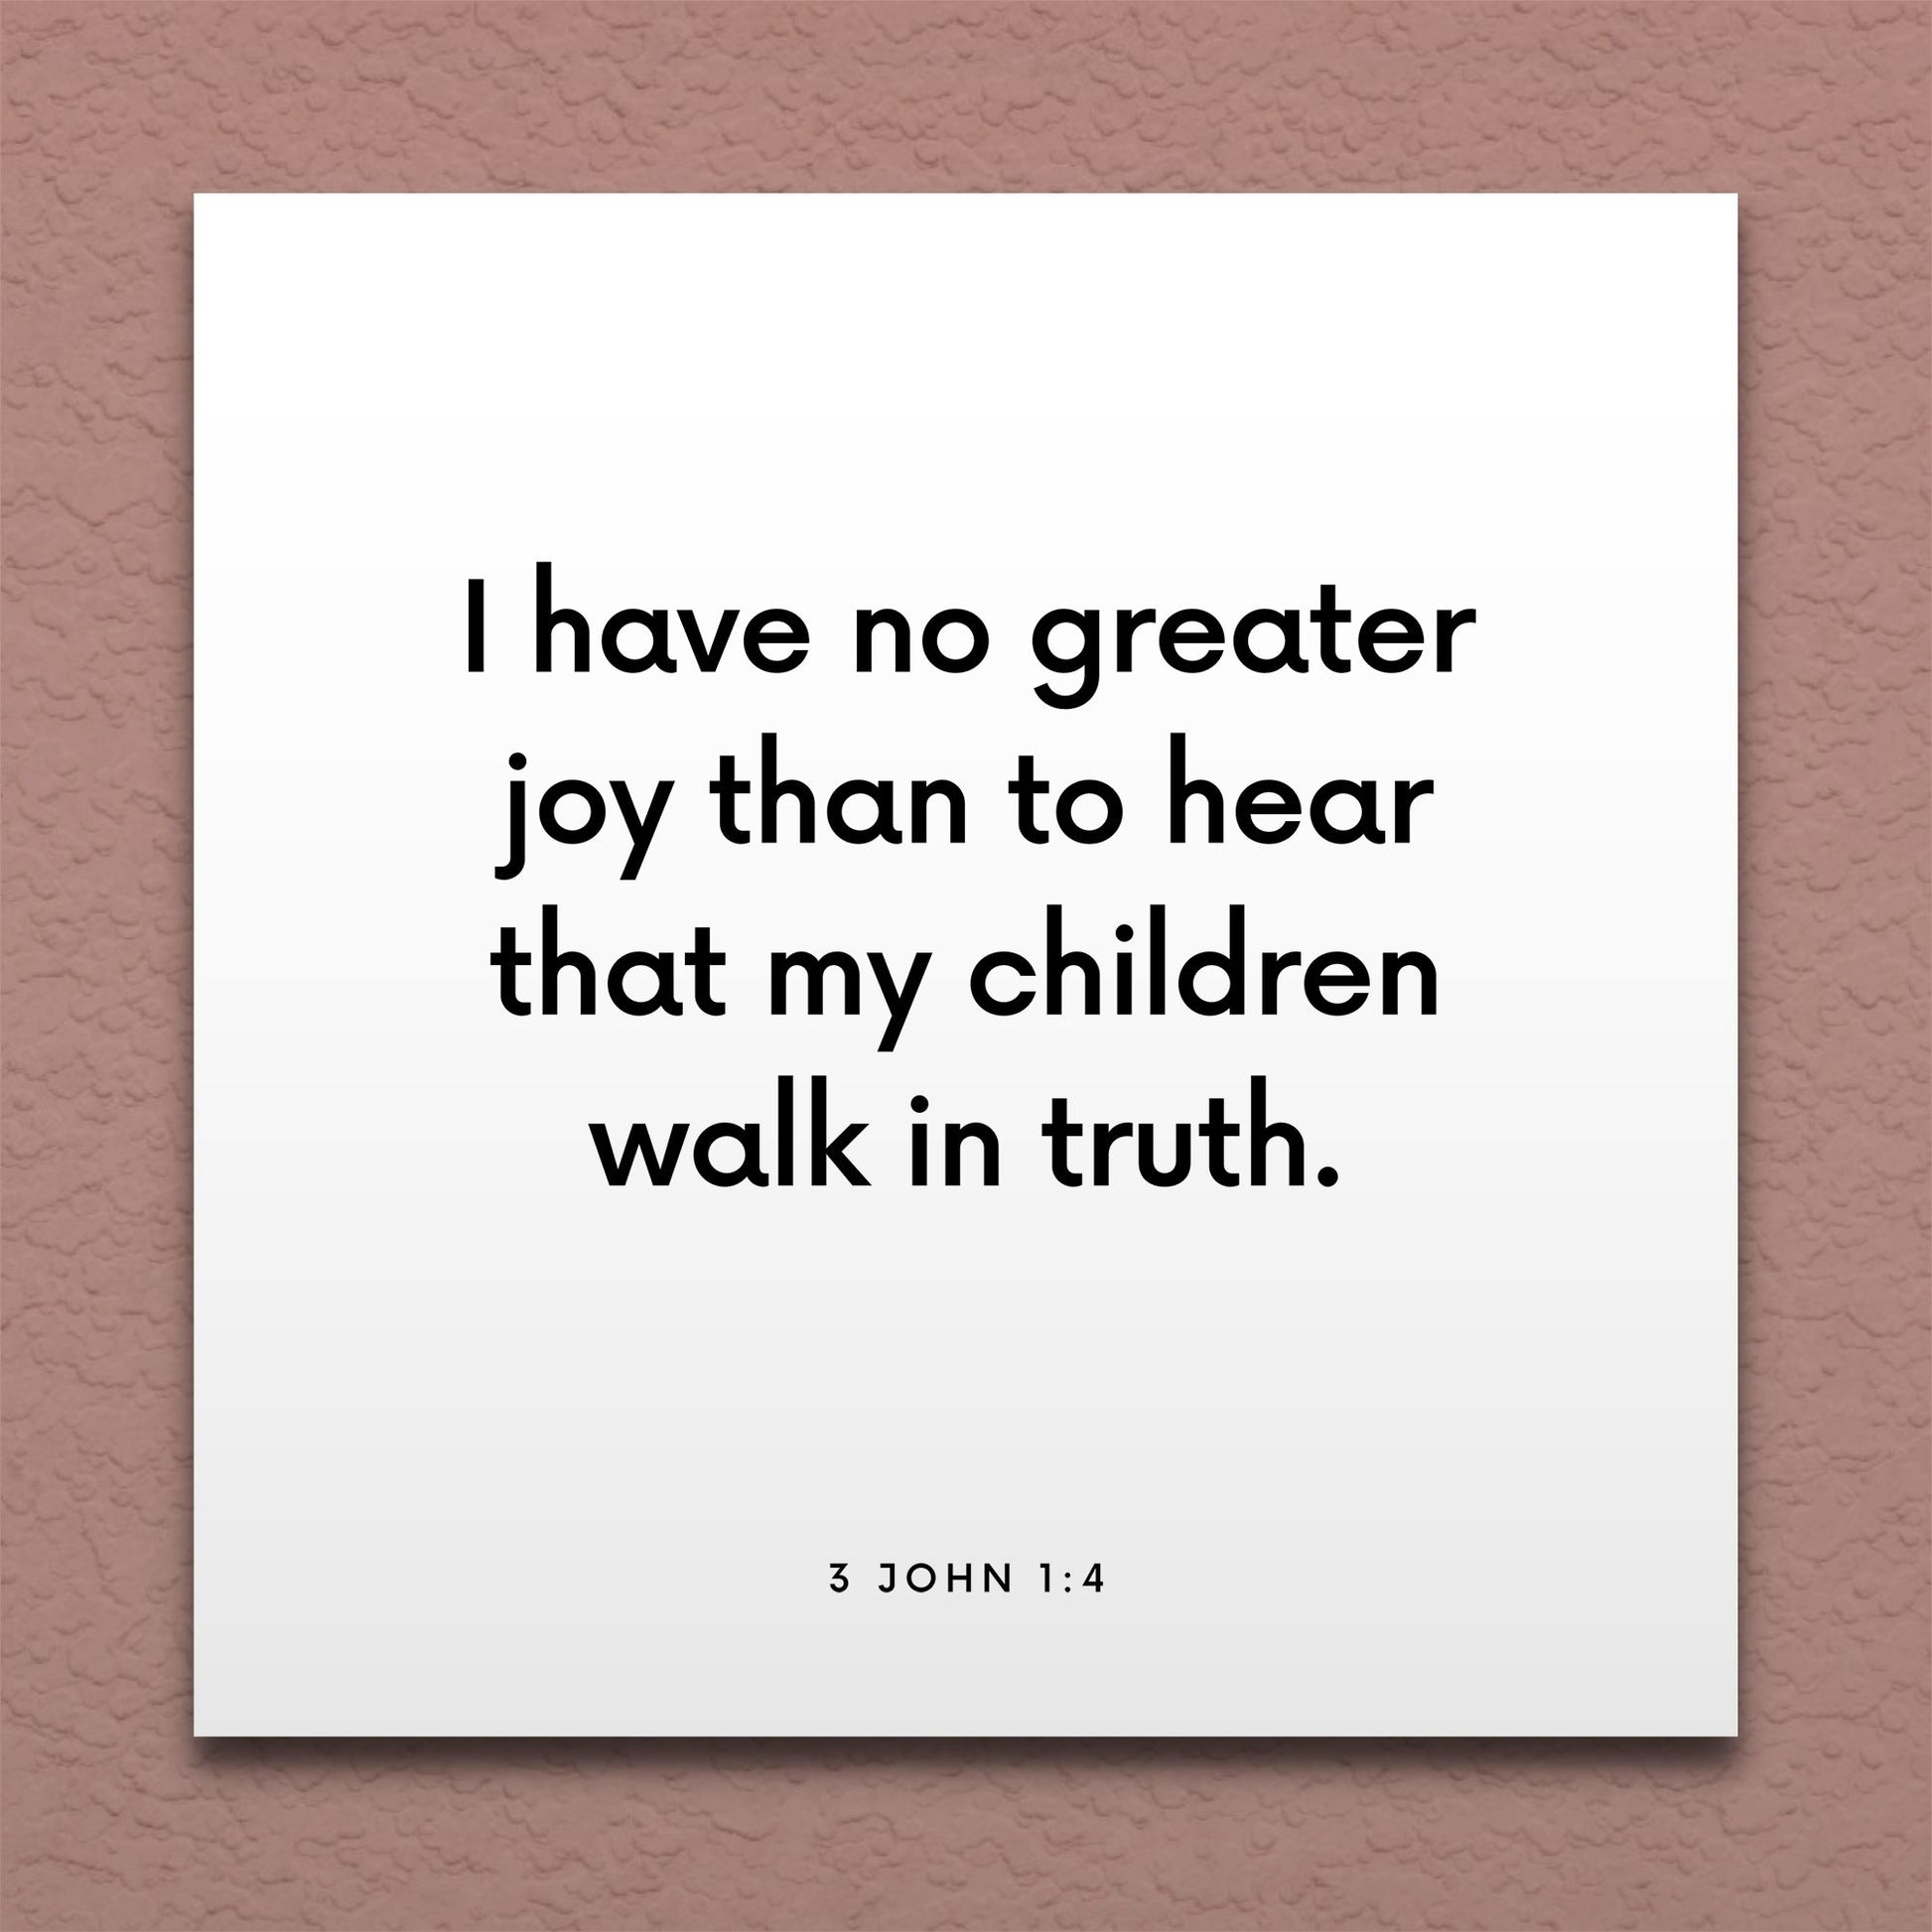 Wall-mounted scripture tile for 3 John 1:4 - "No greater joy than to hear that my children walk in truth"